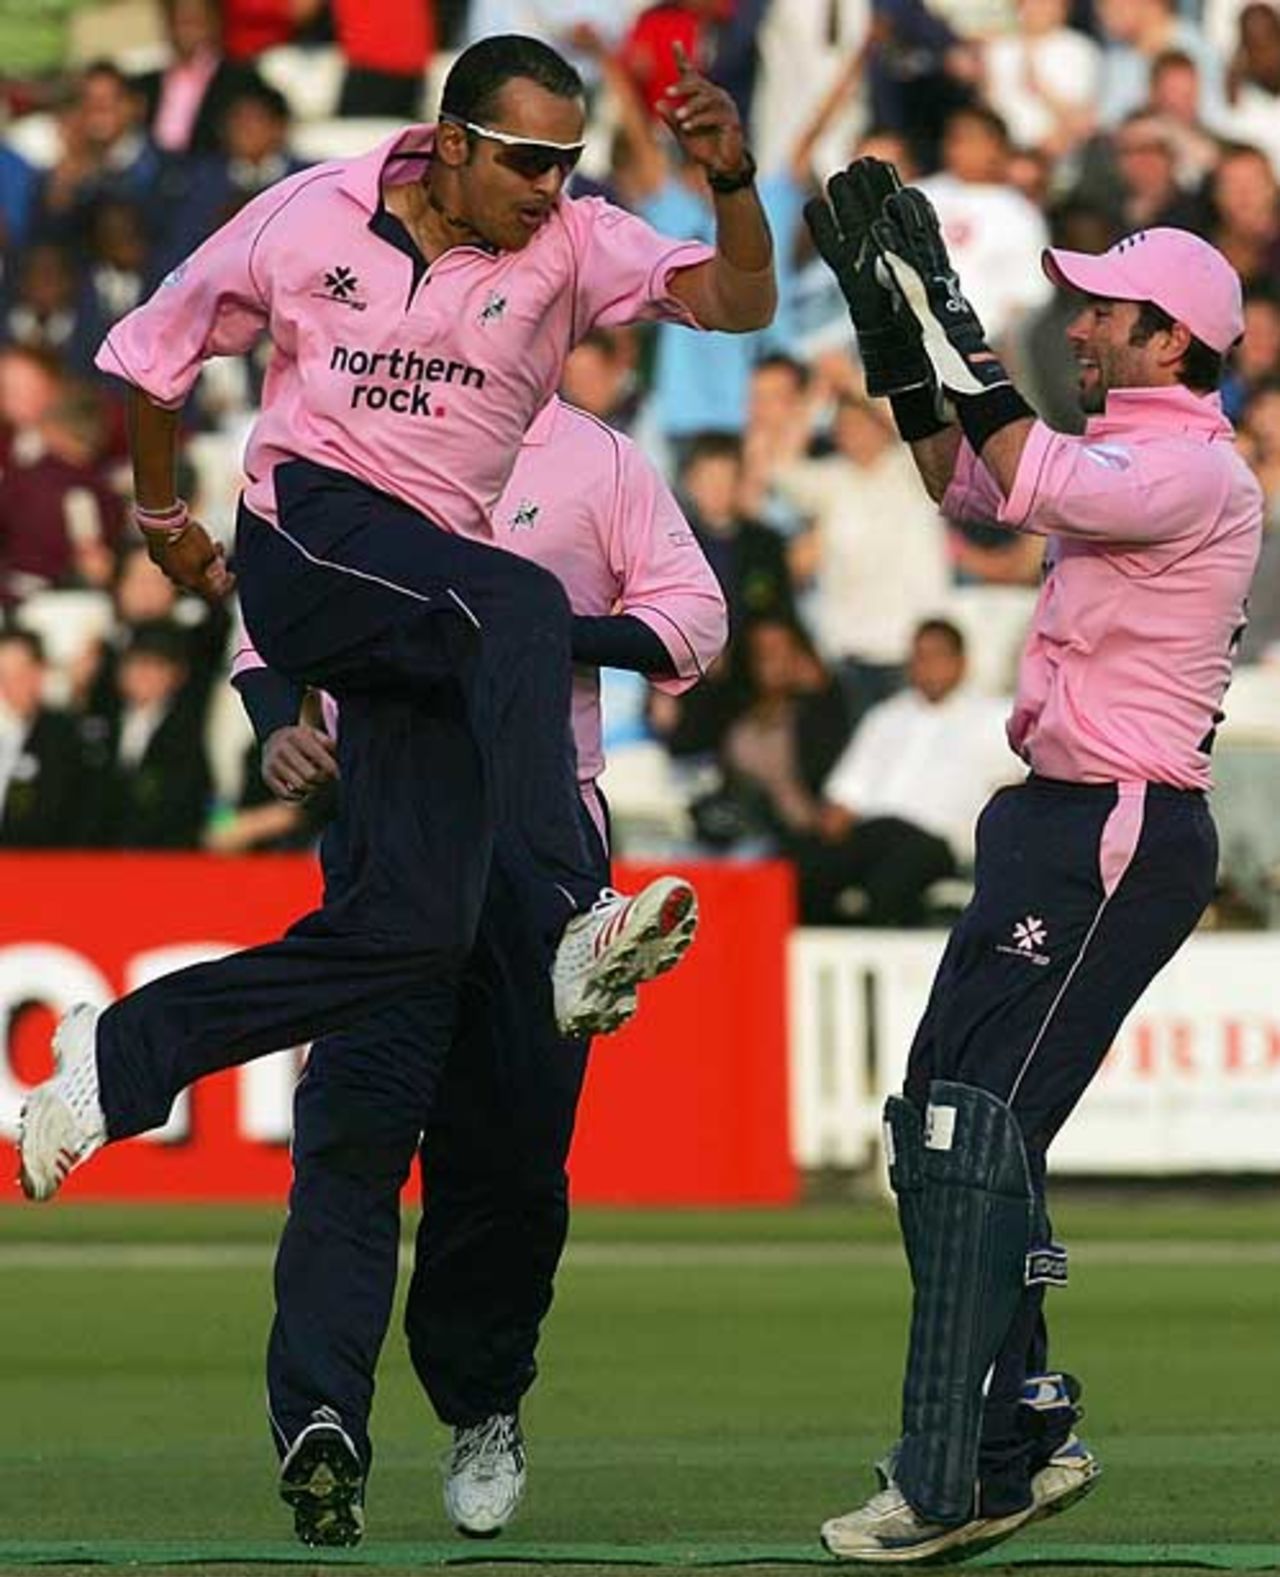 Middlesex's Murali Kartik is all up in joy following the stumping of Essex's Adam Hollioake by Ben Scott, Lord's, July 6, 2007